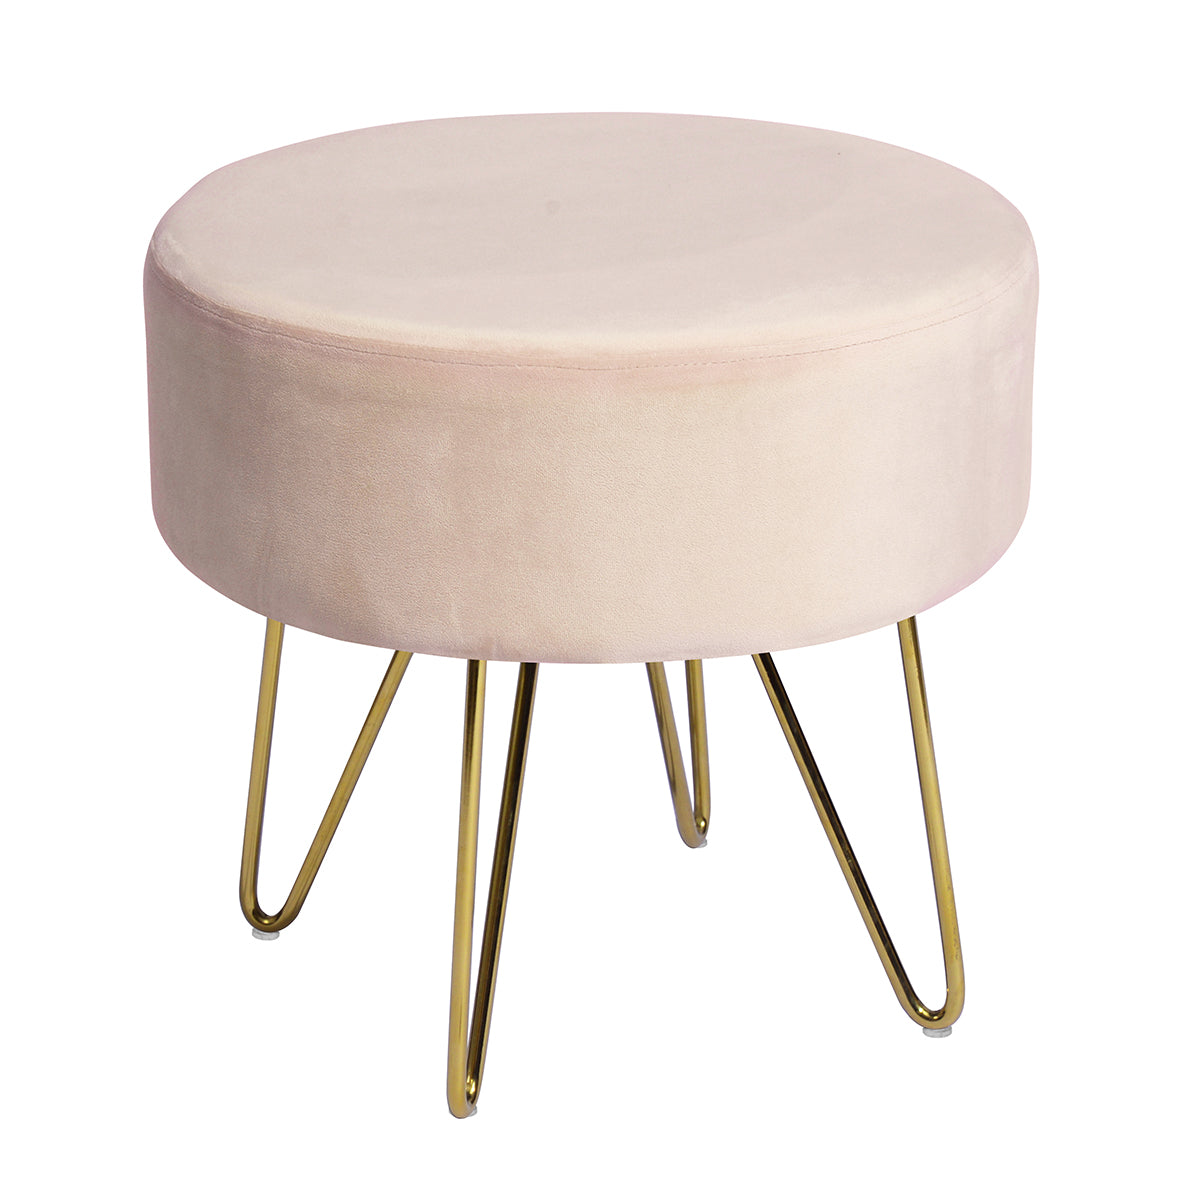 Pink and Gold Decorative Round Shaped Ottoman with Metal Legs